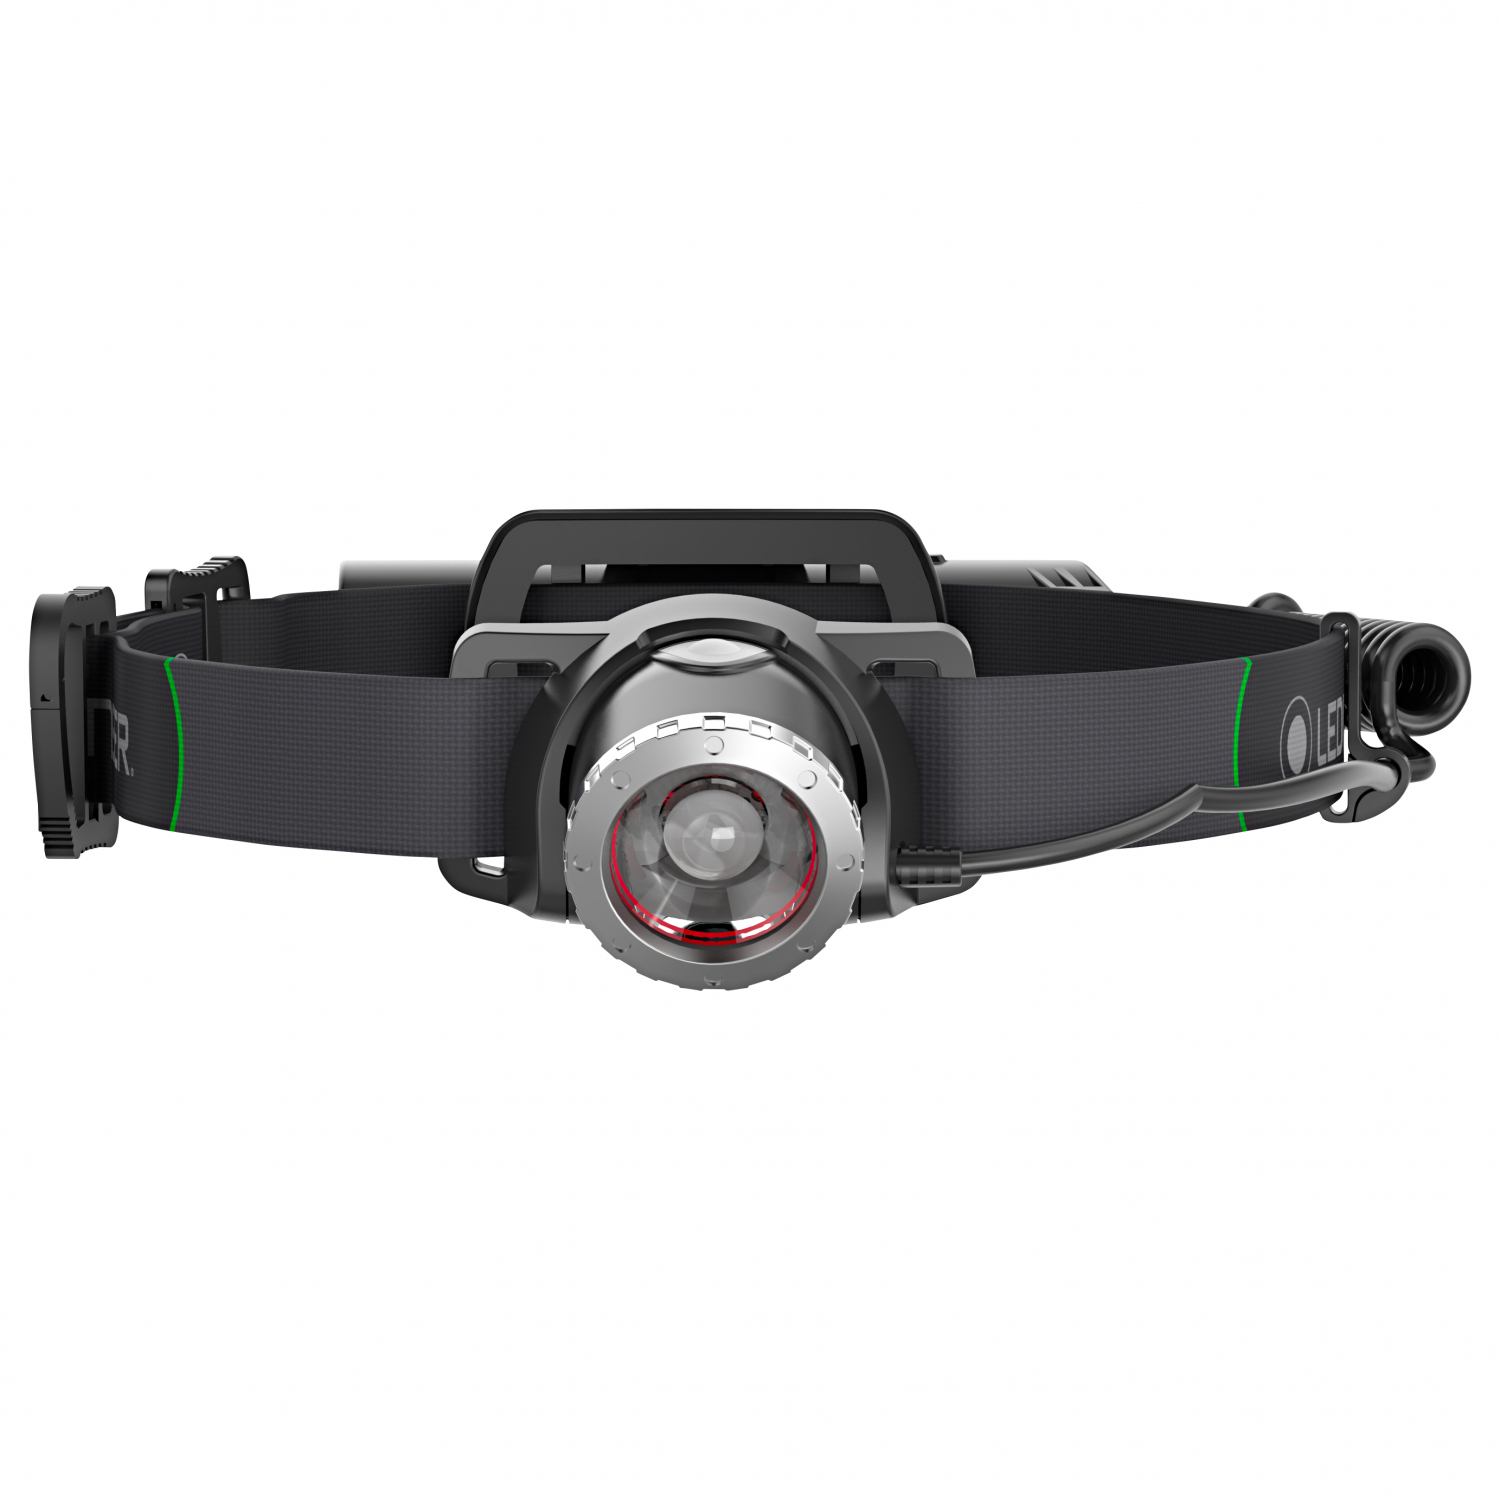 Lenser Head MH 10 at low prices | Hunting Shop